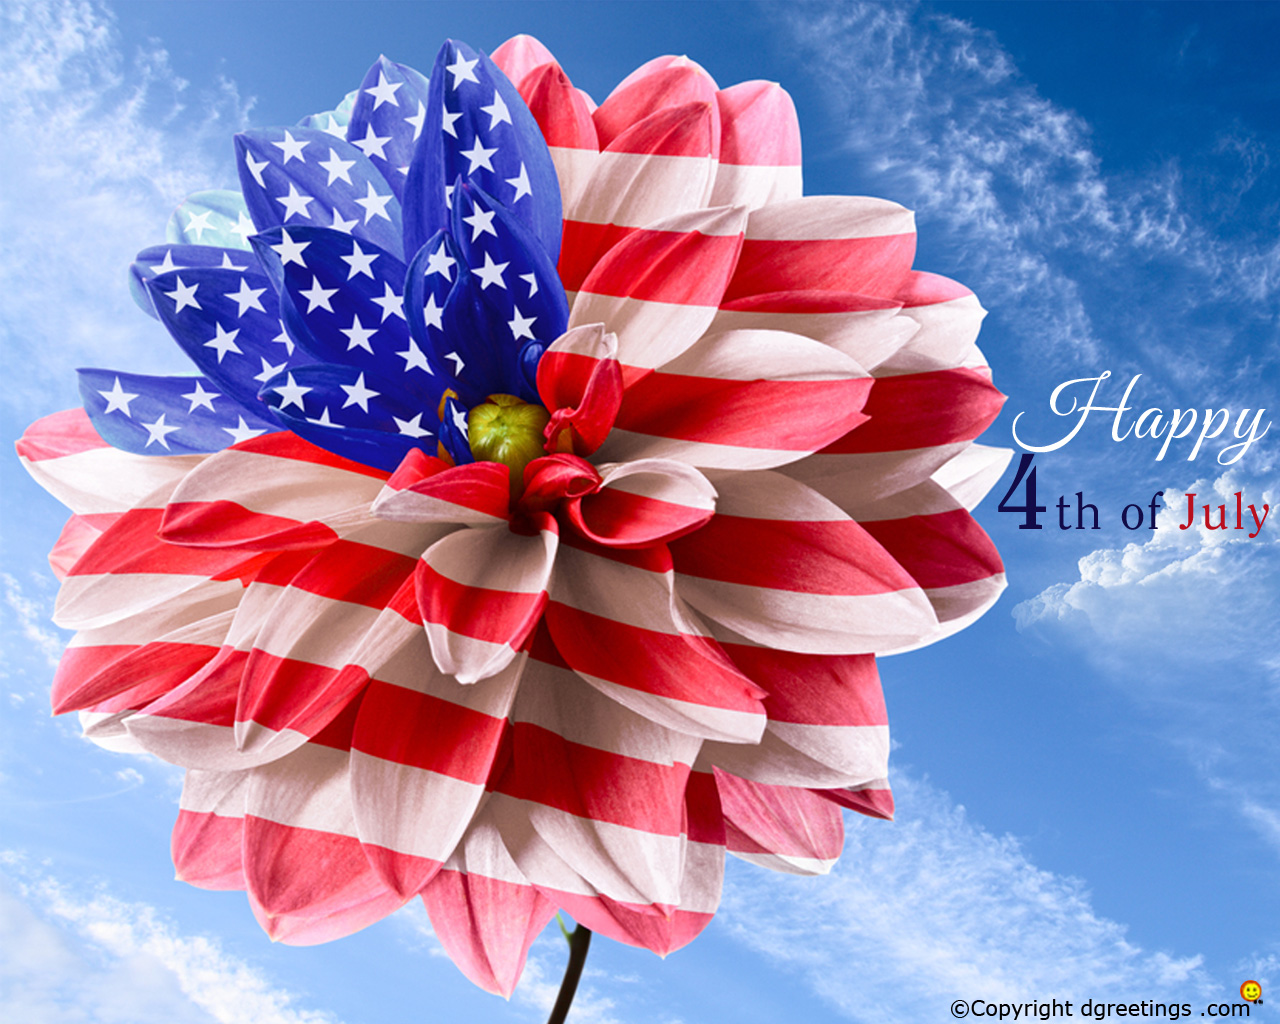 Free Aesthetic 4th Of July Wallpaper  Download in Illustrator EPS SVG  JPG PNG  Templatenet